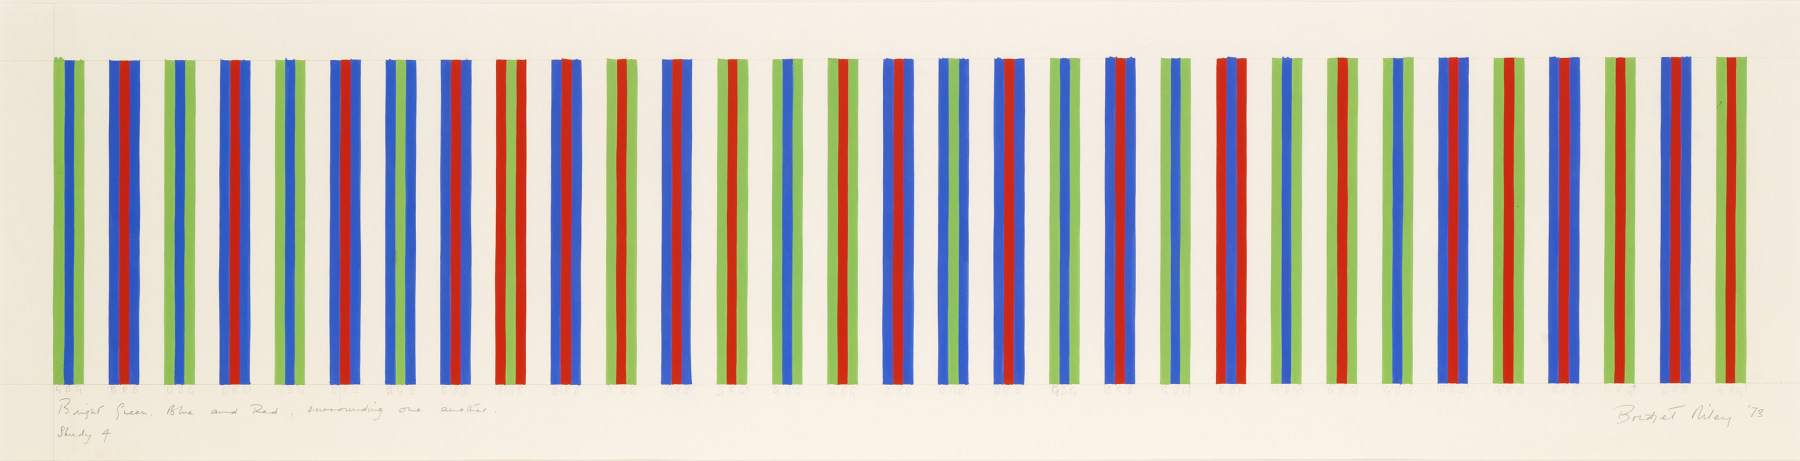 Bridget Riley, Bright Green, Blue and Red, Surrounding One Another, Study 4,&nbsp;1973